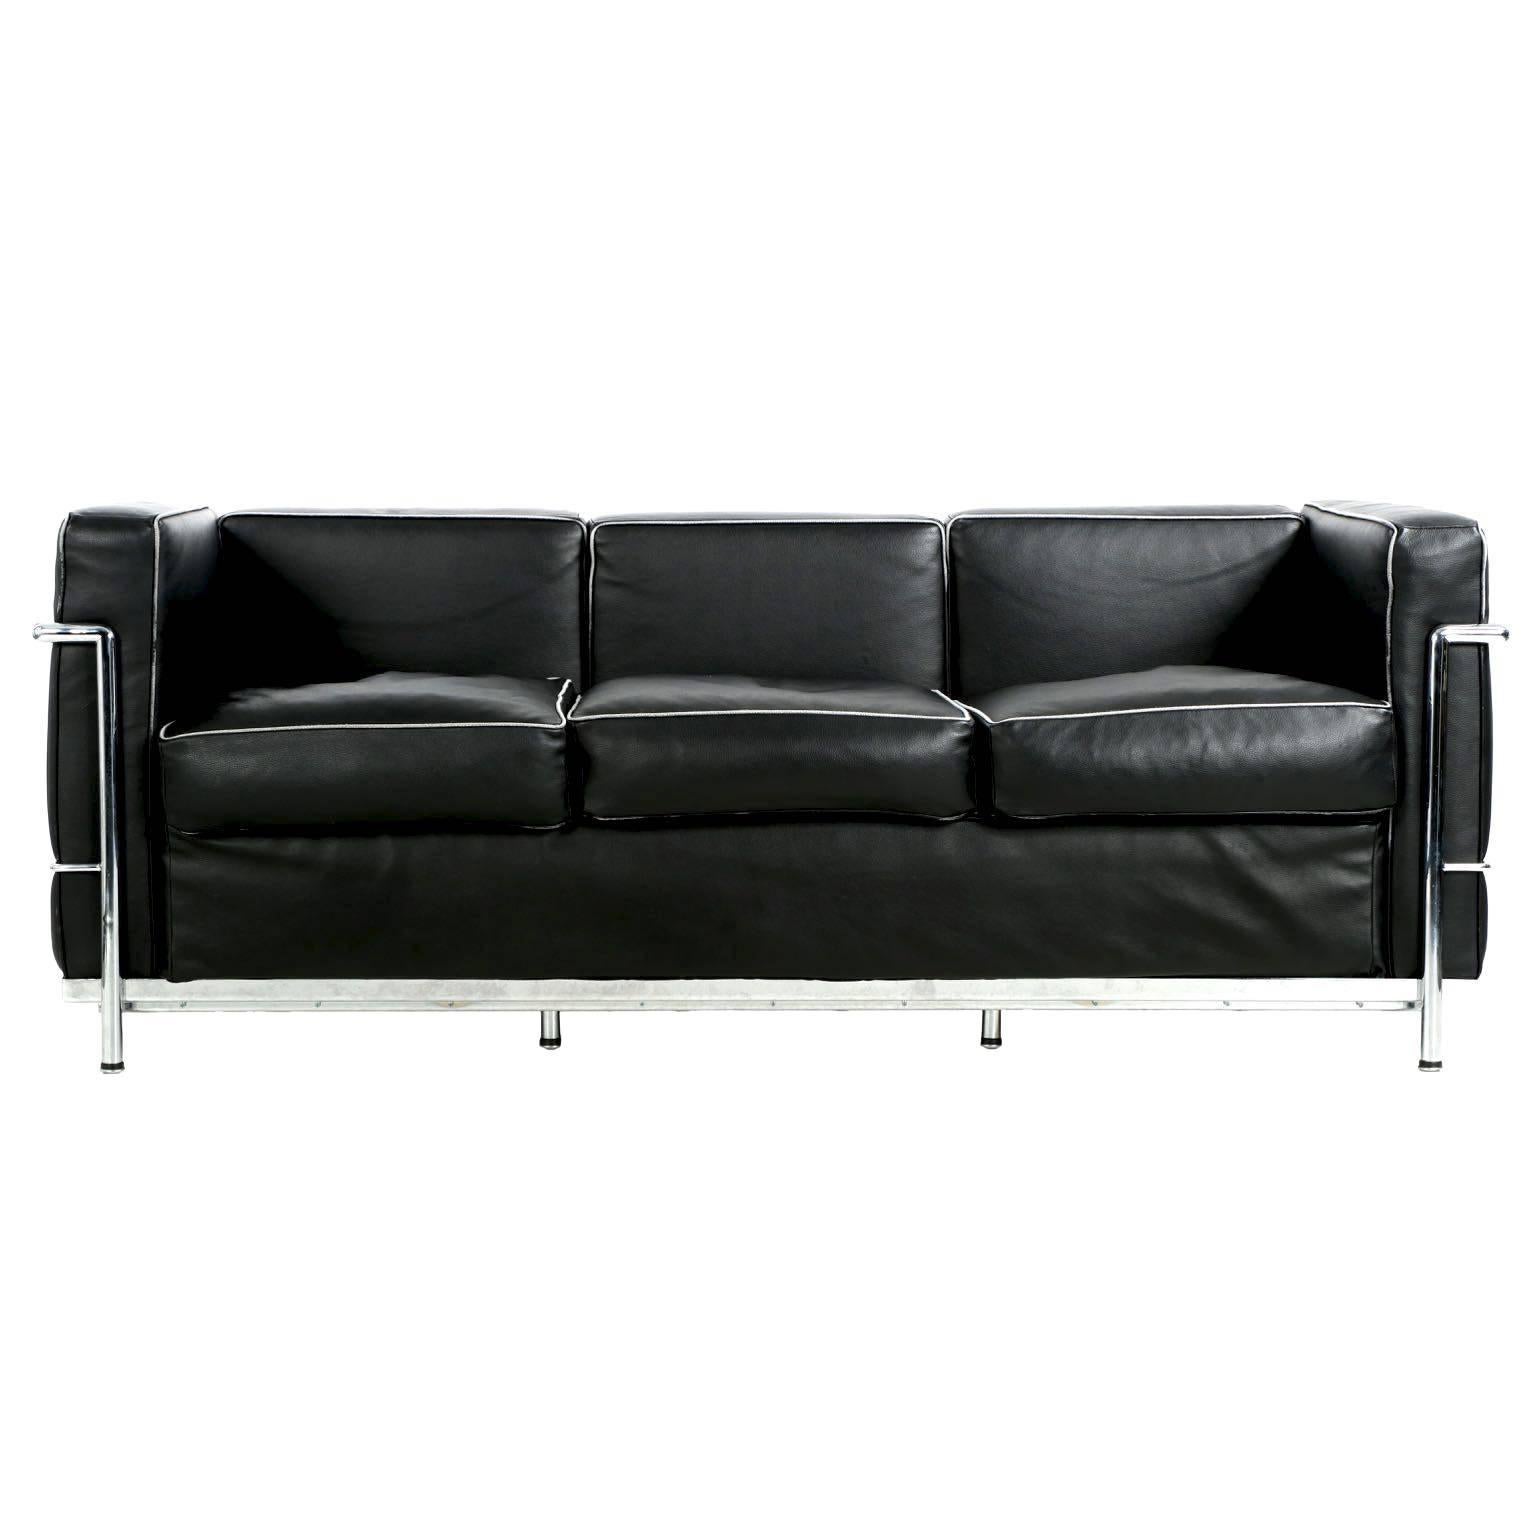 Modern Black Leather and Chrome Steel Petite Sofa in Manner of Le Corbusier LC2